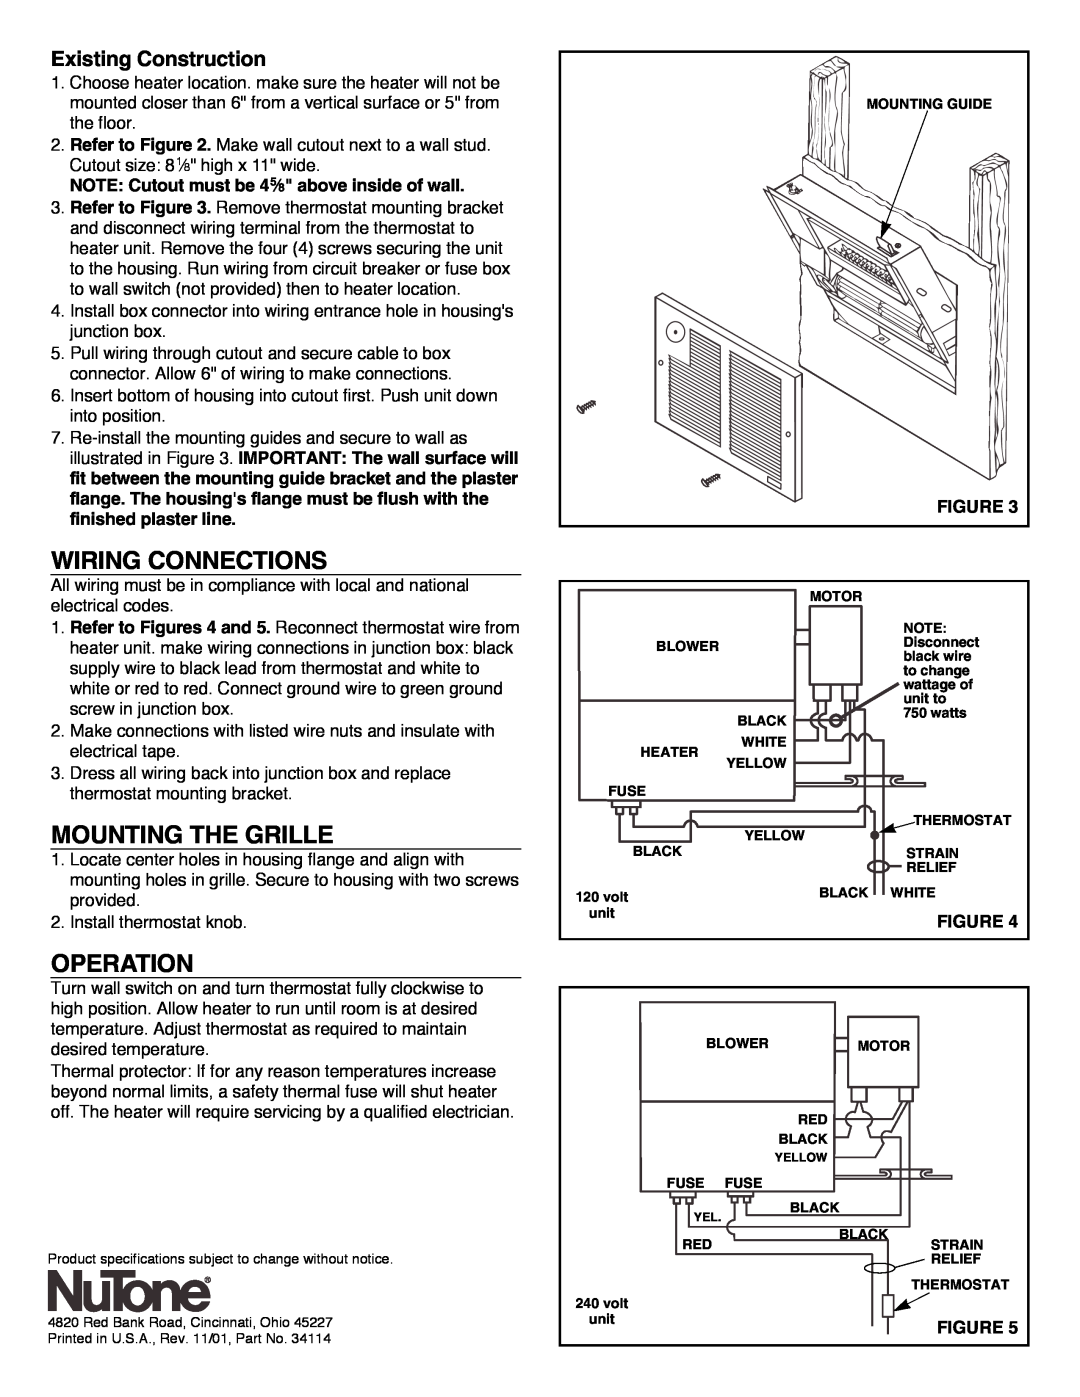 NuTone 9315XT, 9315T installation instructions Wiring Connections, Mounting The Grille, Operation, Existing Construction 